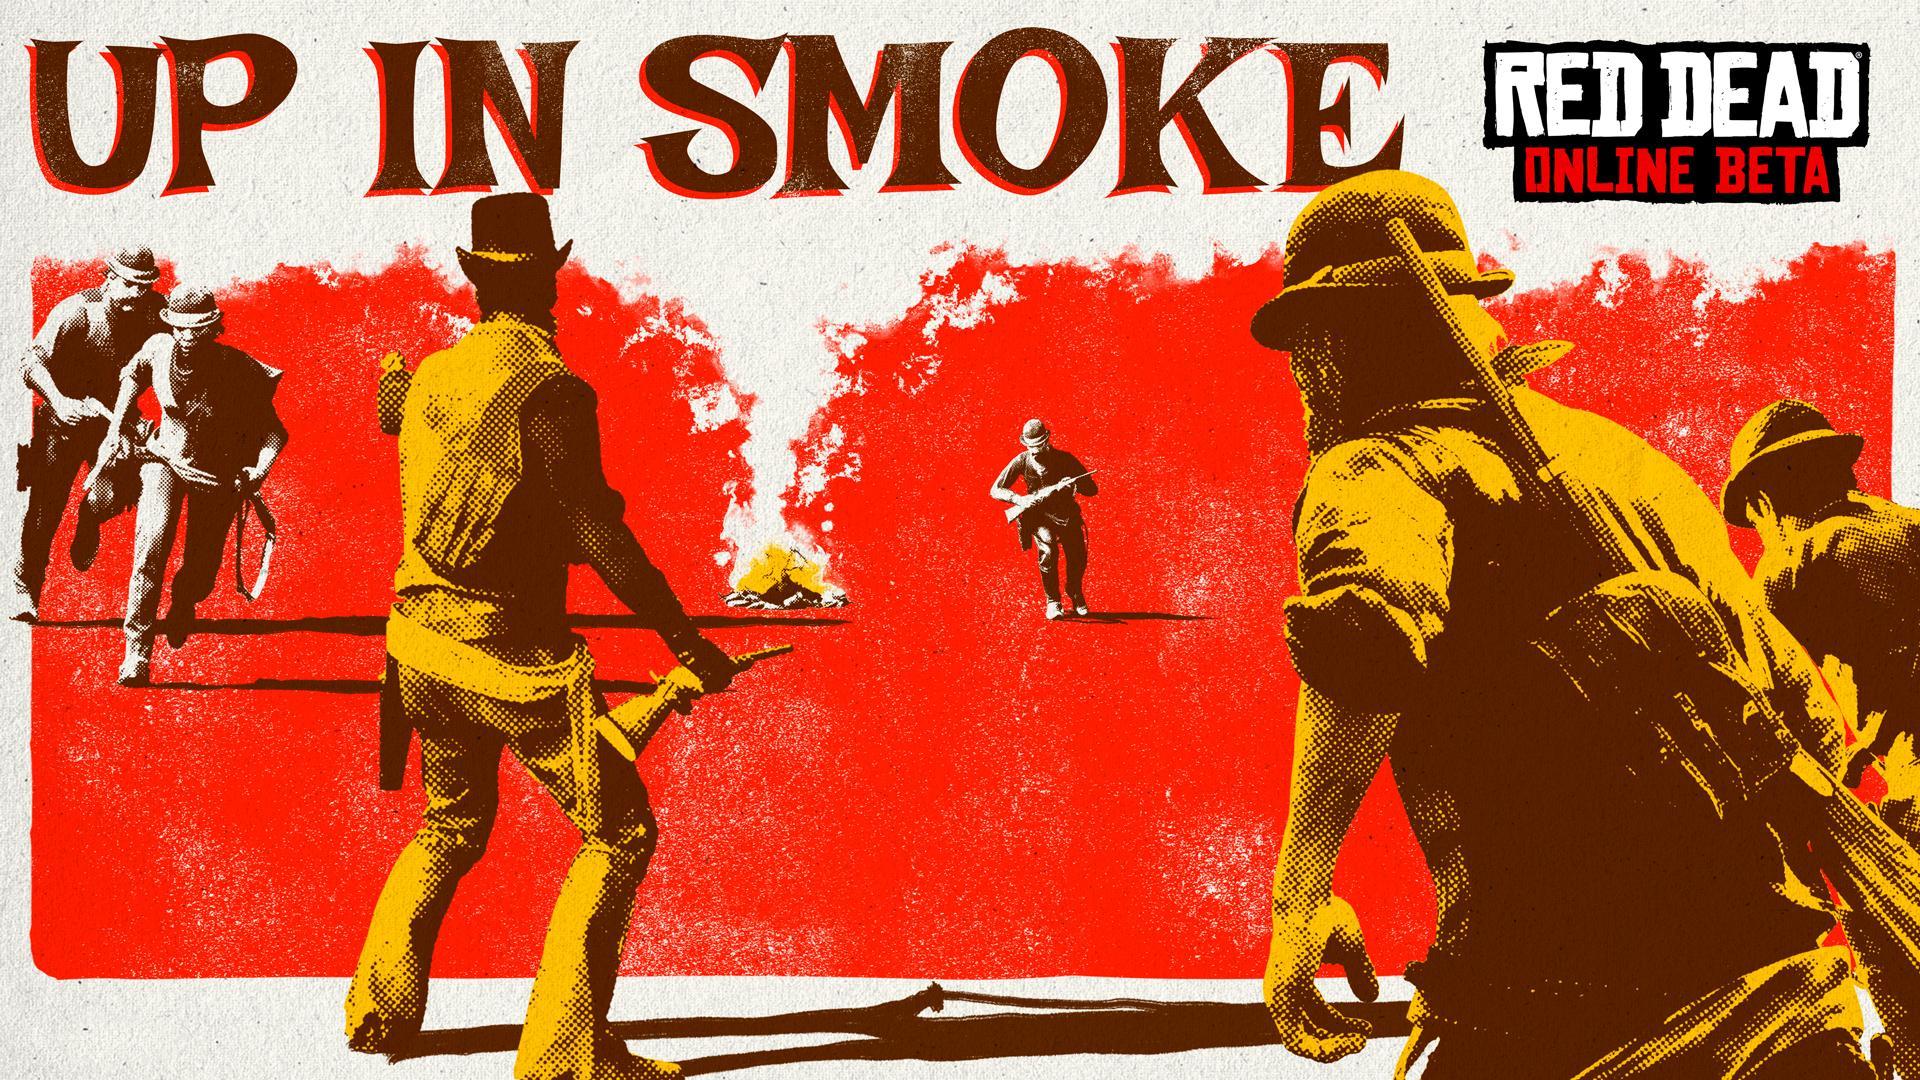 Red Dead Online Mode - Up In Smoke